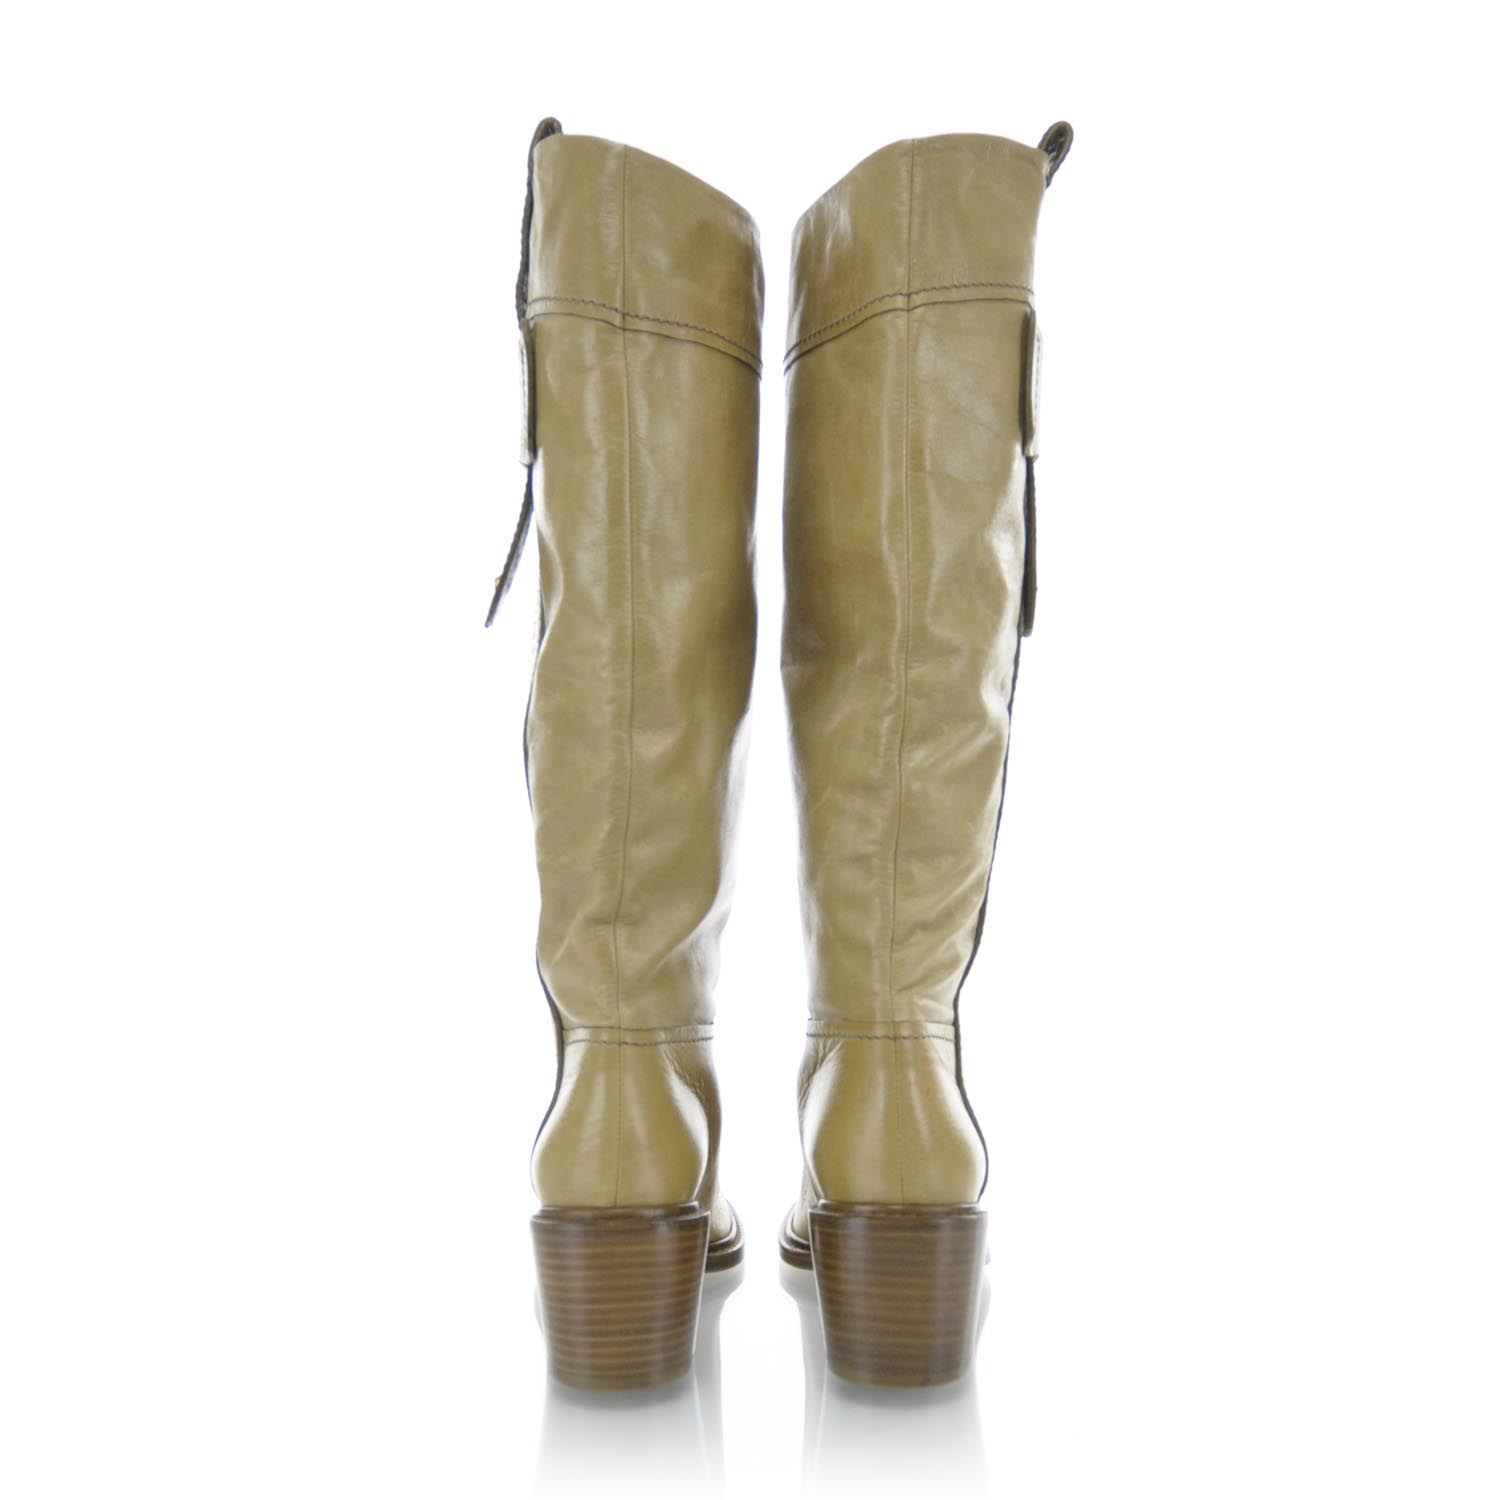 CHLOE Leather Tall Riding Boots 37.5 30127